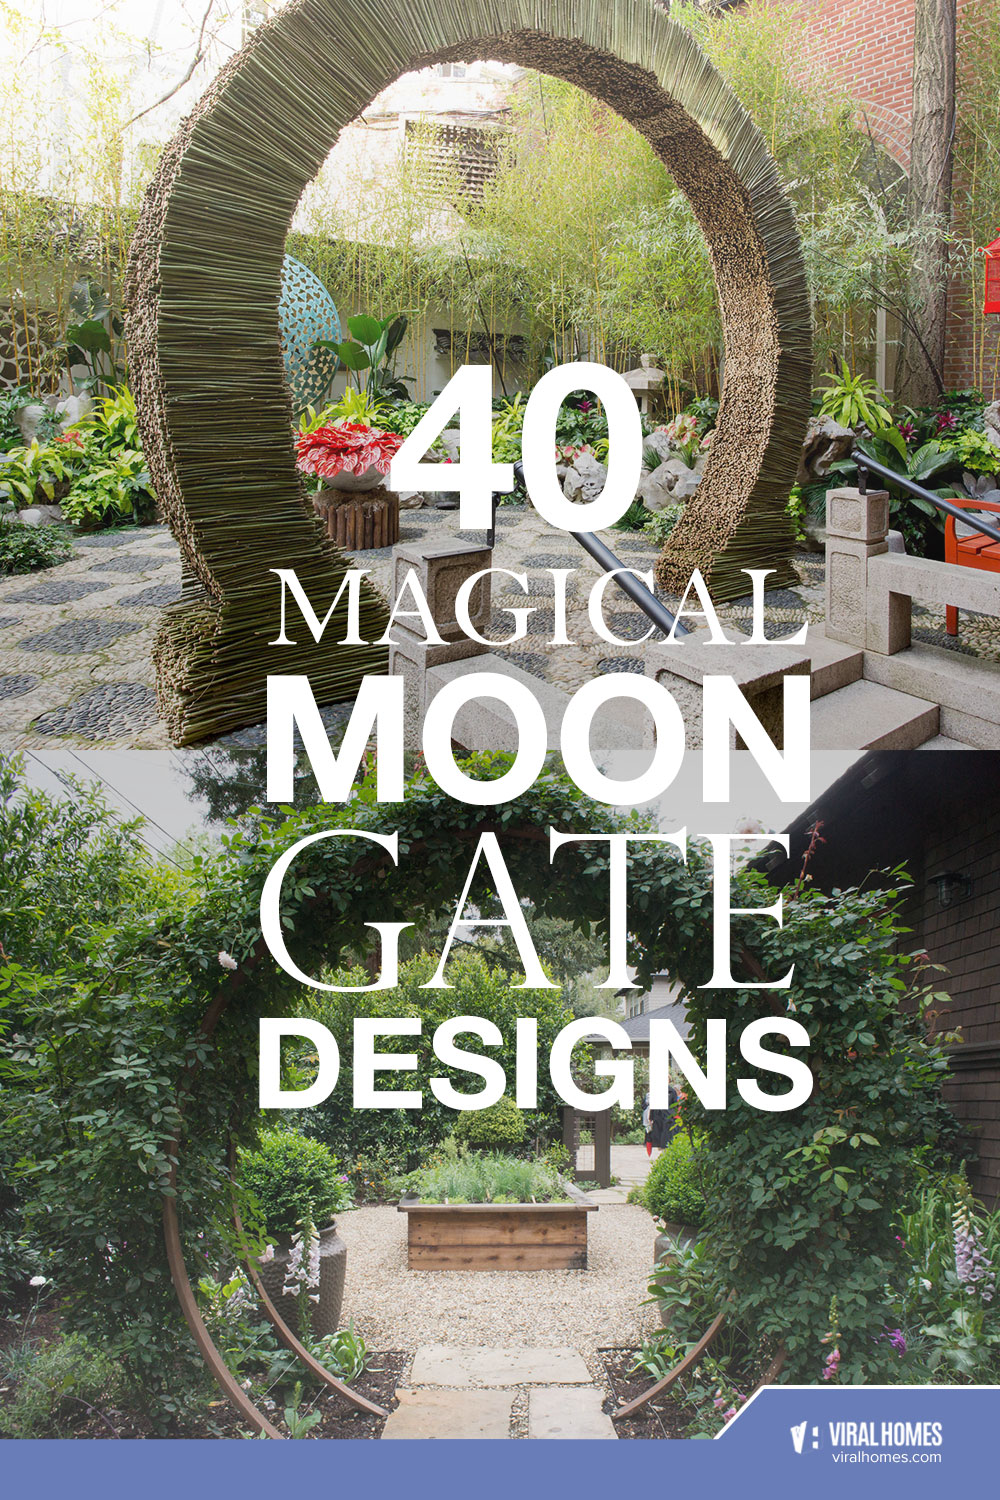 Magical Moon Gate Designs You Can Have In Your Garden